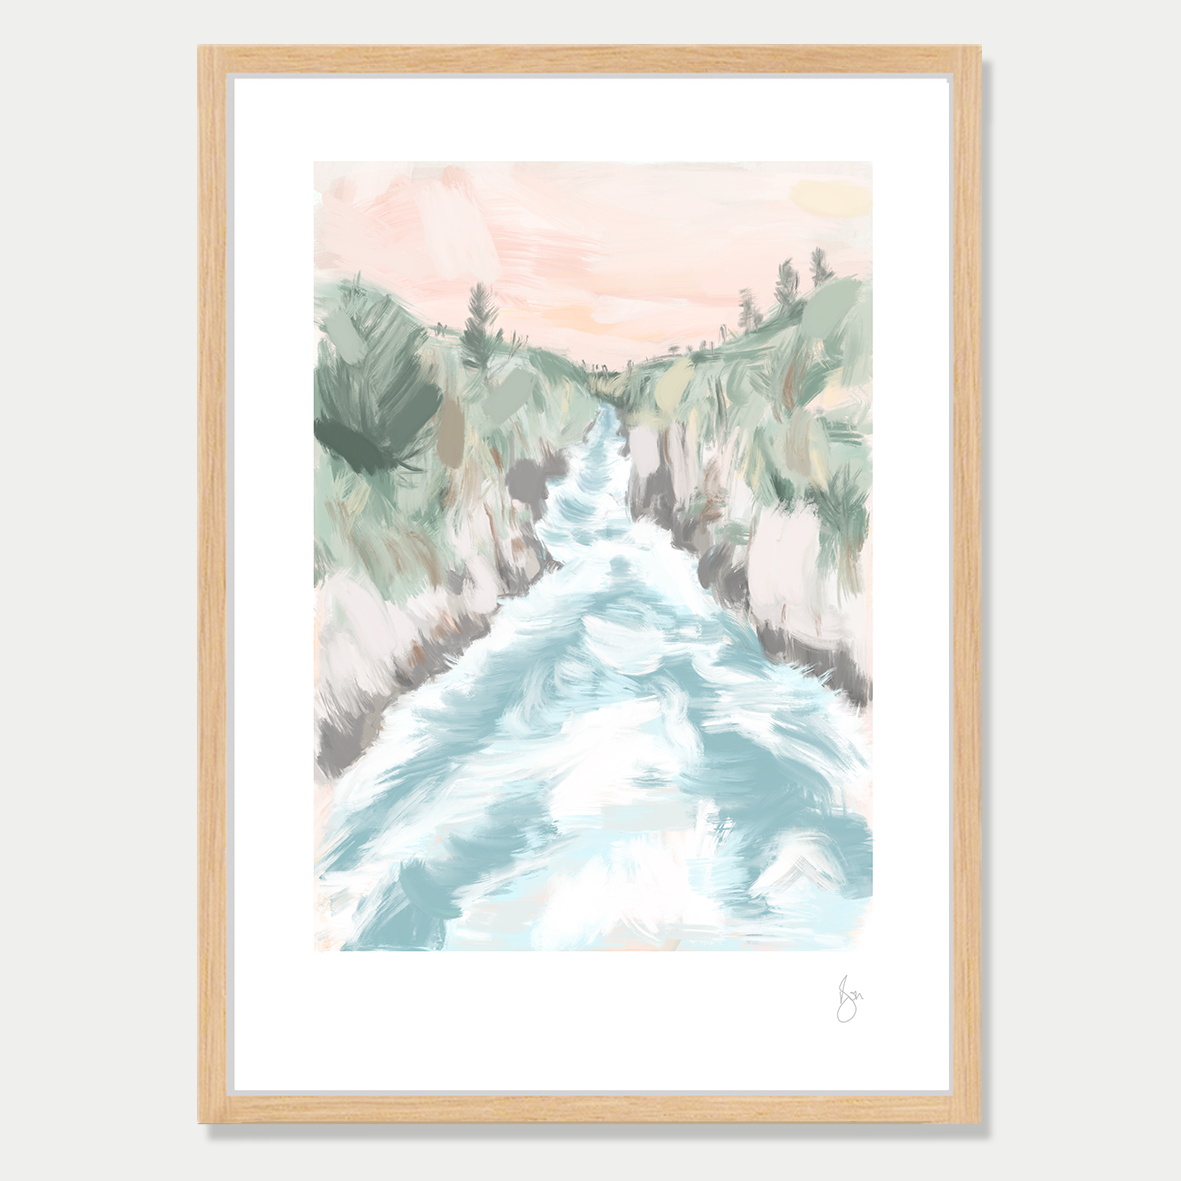 This art print is a still life of a the Huka Falls in New Zealand, by Bon Jung. Printed in New Zealand by endemicworld and framed in raw oak.